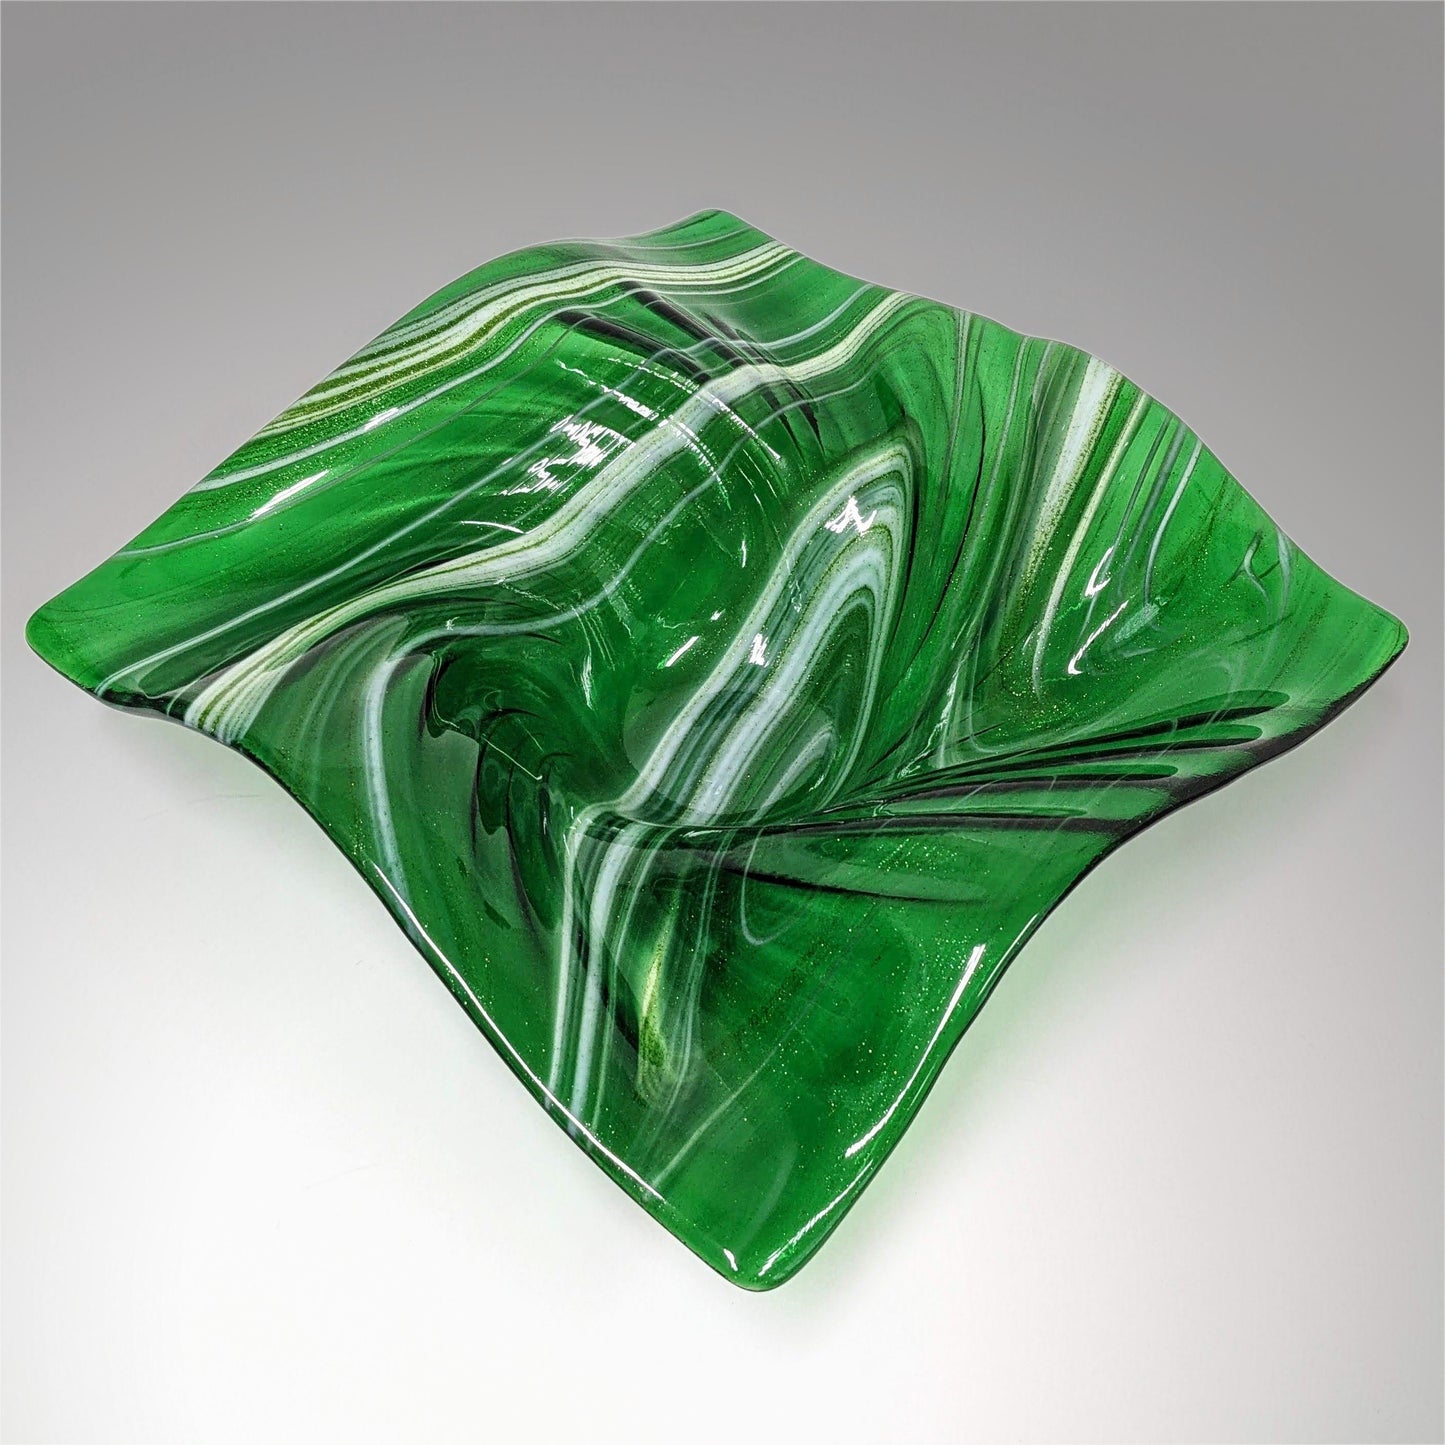 Glass Art Wave Sculpture Bowl in Sparkly Green and White